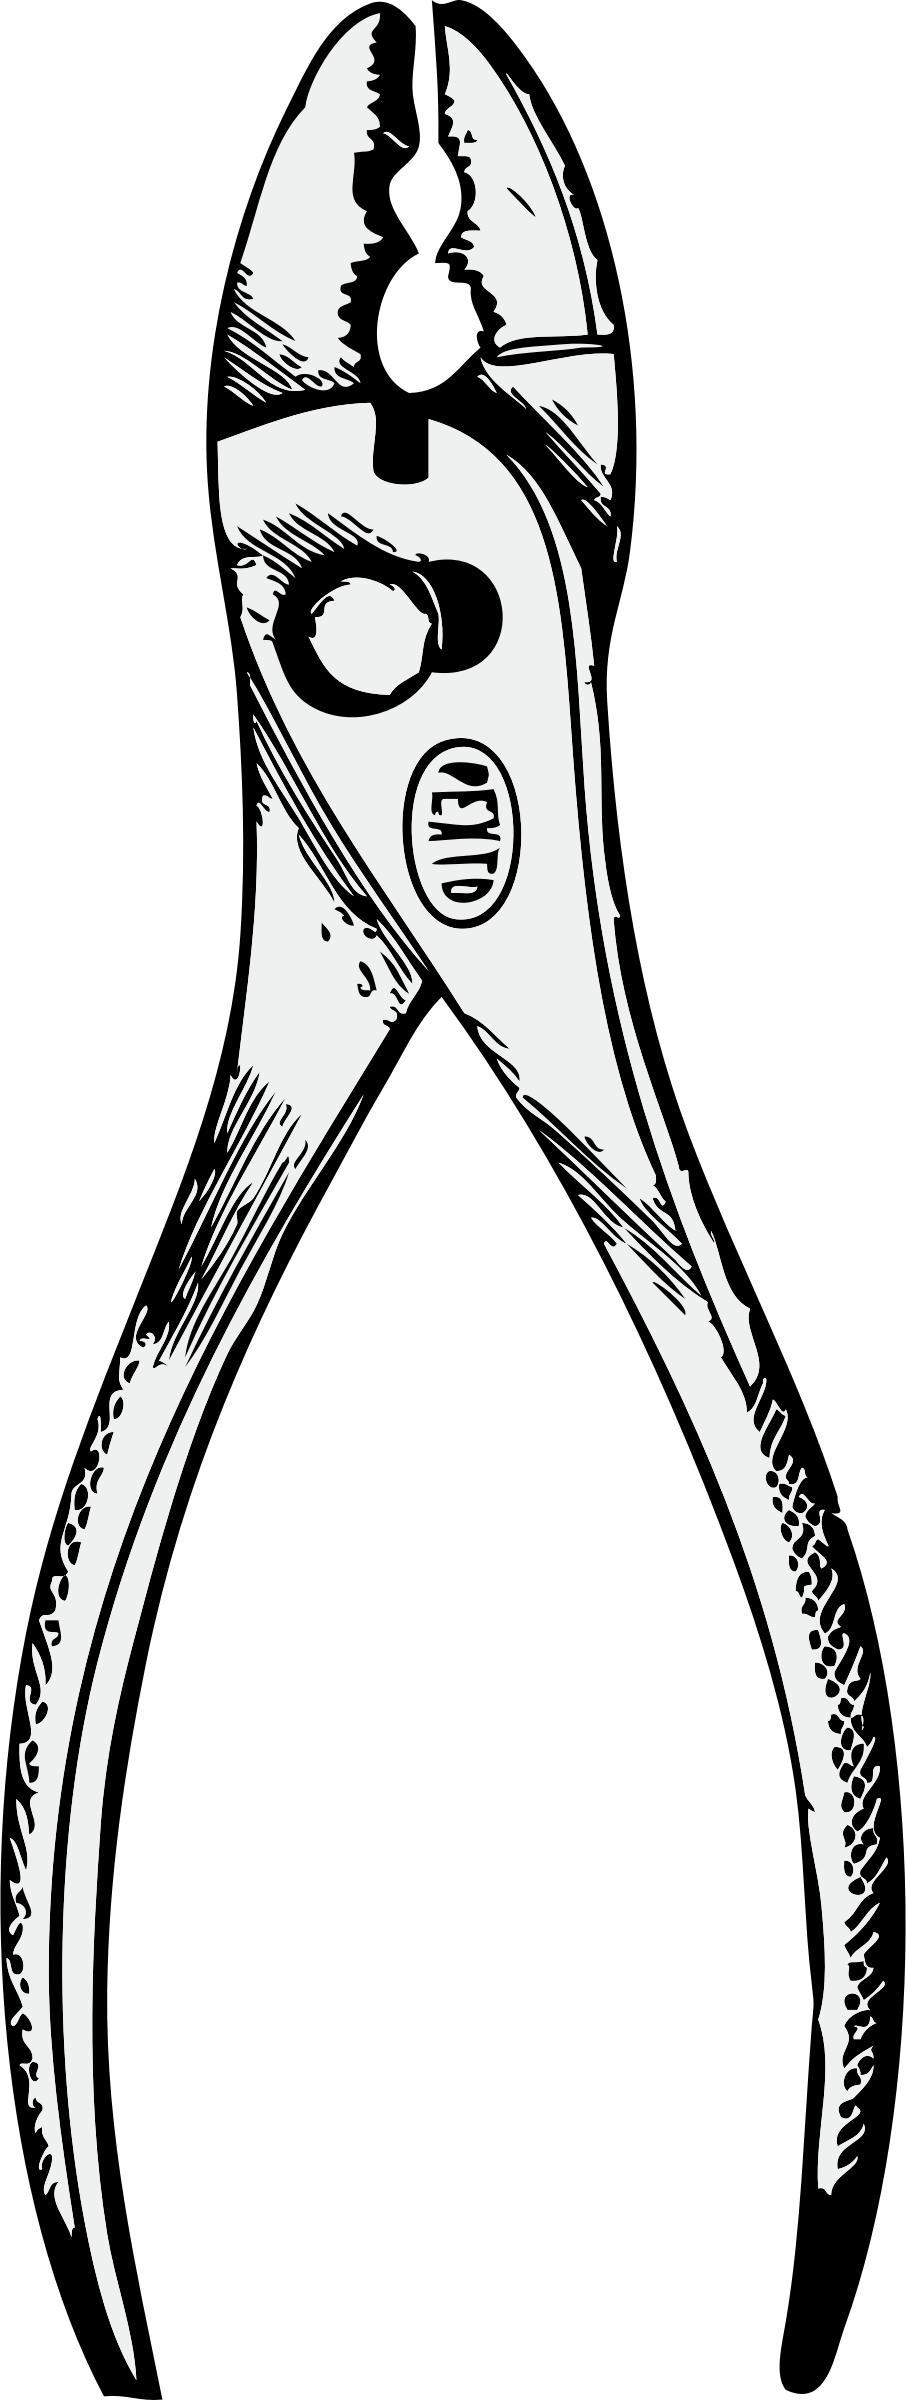 slip-joint pliers png